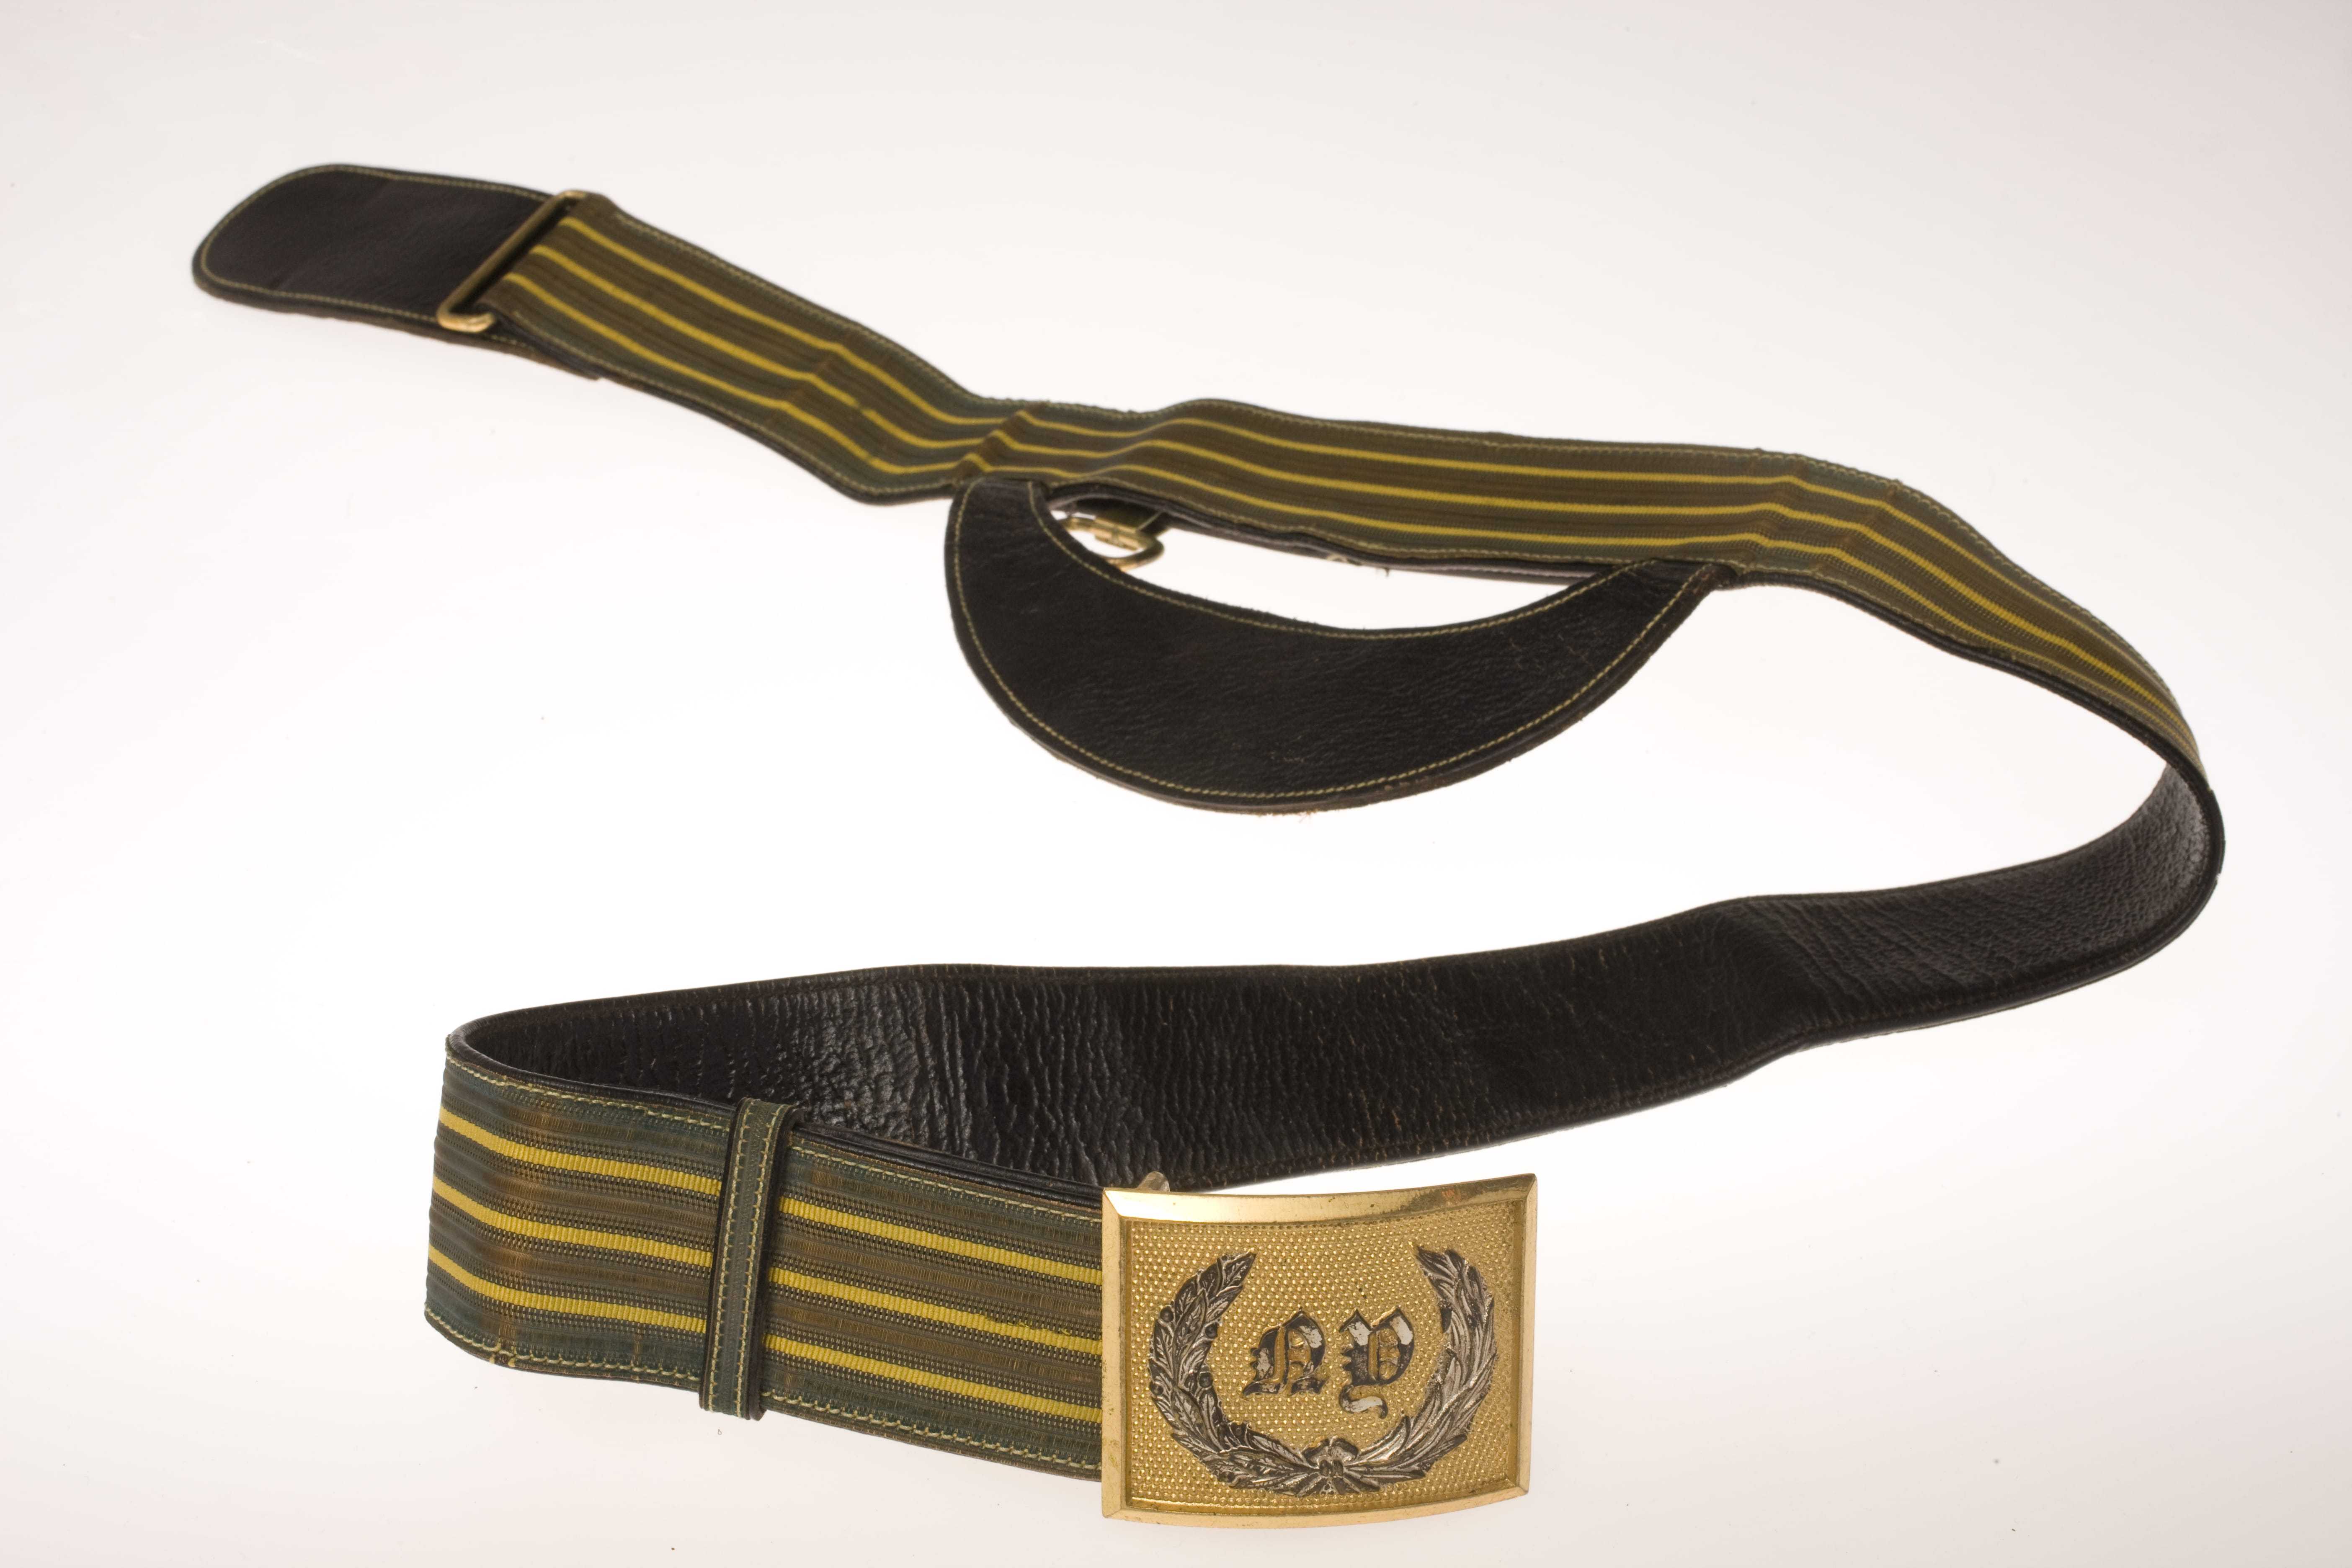 A yellow and black striped belt with "NY" and a laurel wreath on the buckle